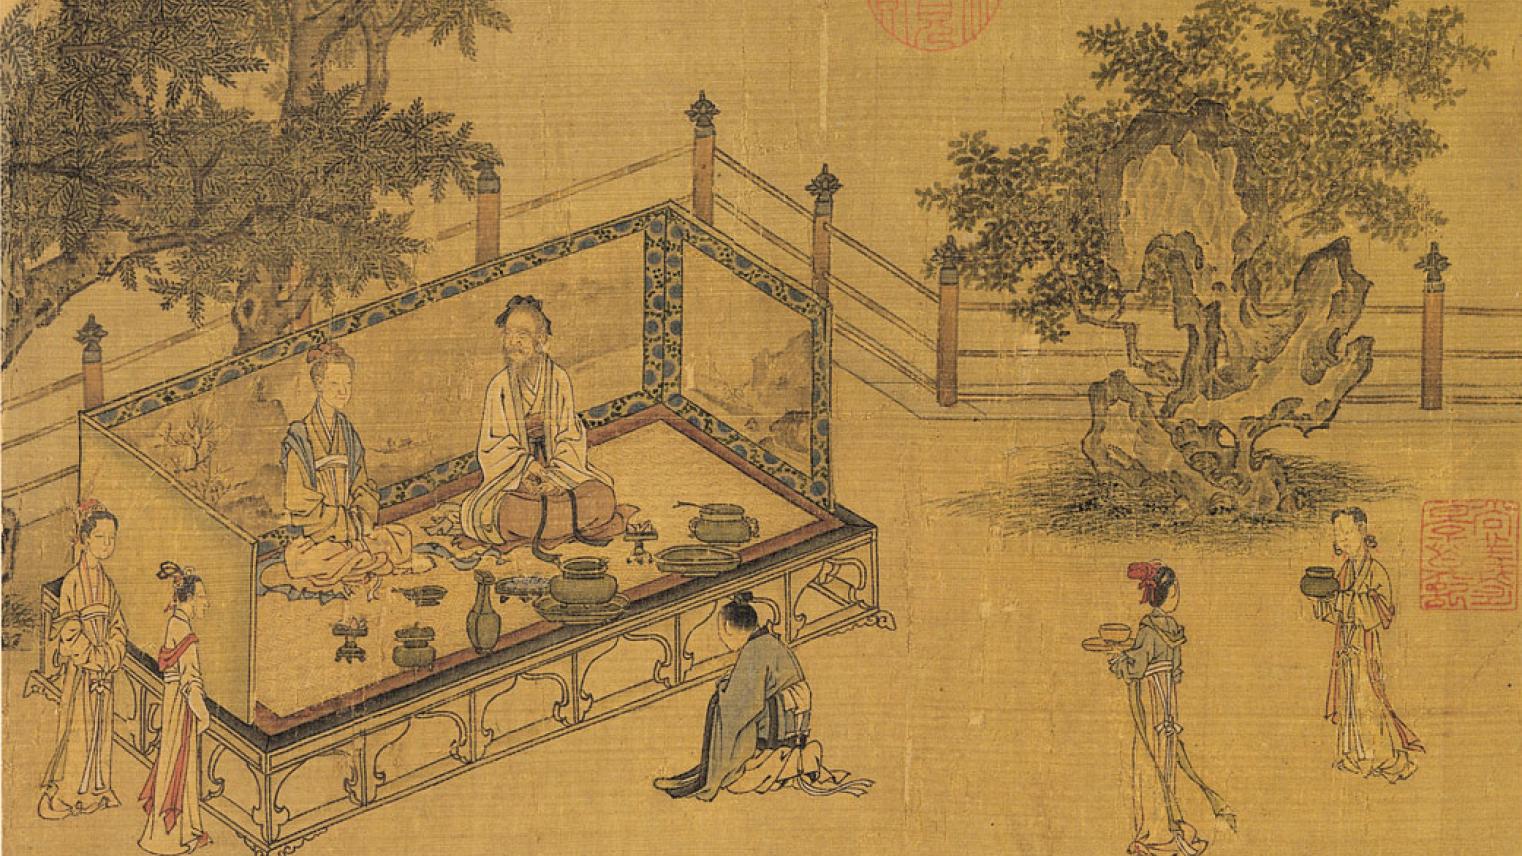 Scene from Illustrations of the Classic of Filial Piety, depicting a son kneeling before his parents.